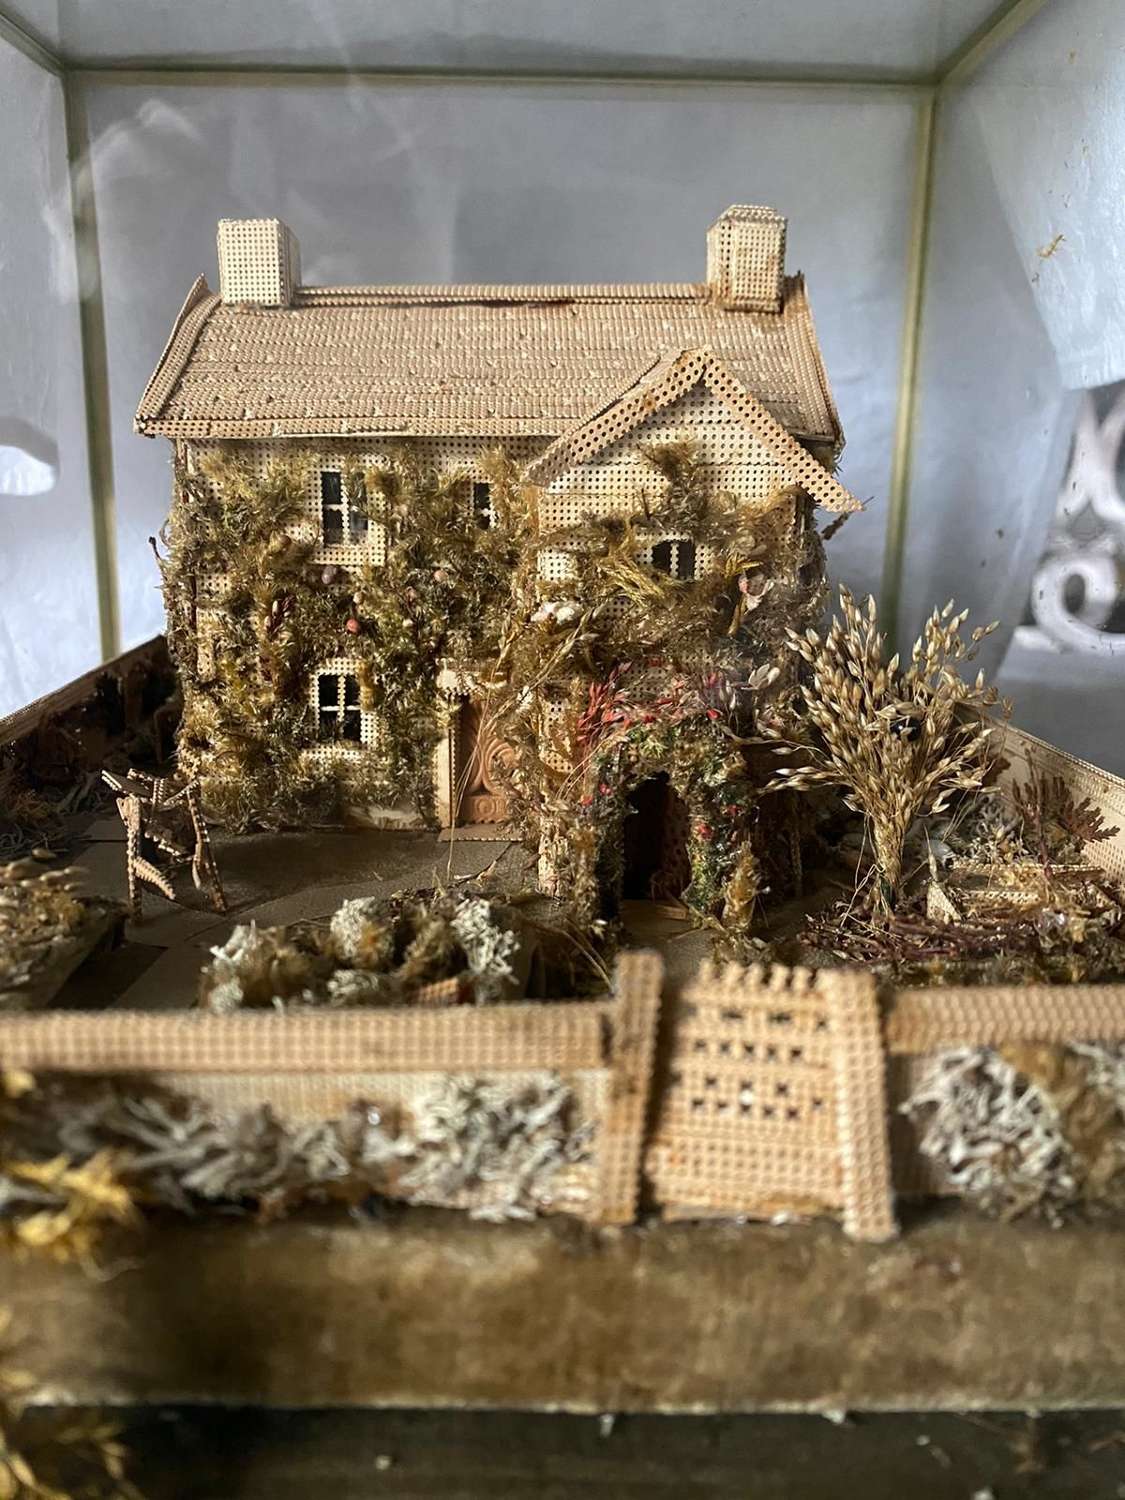 A model of a cottage Made of pinpricked wood